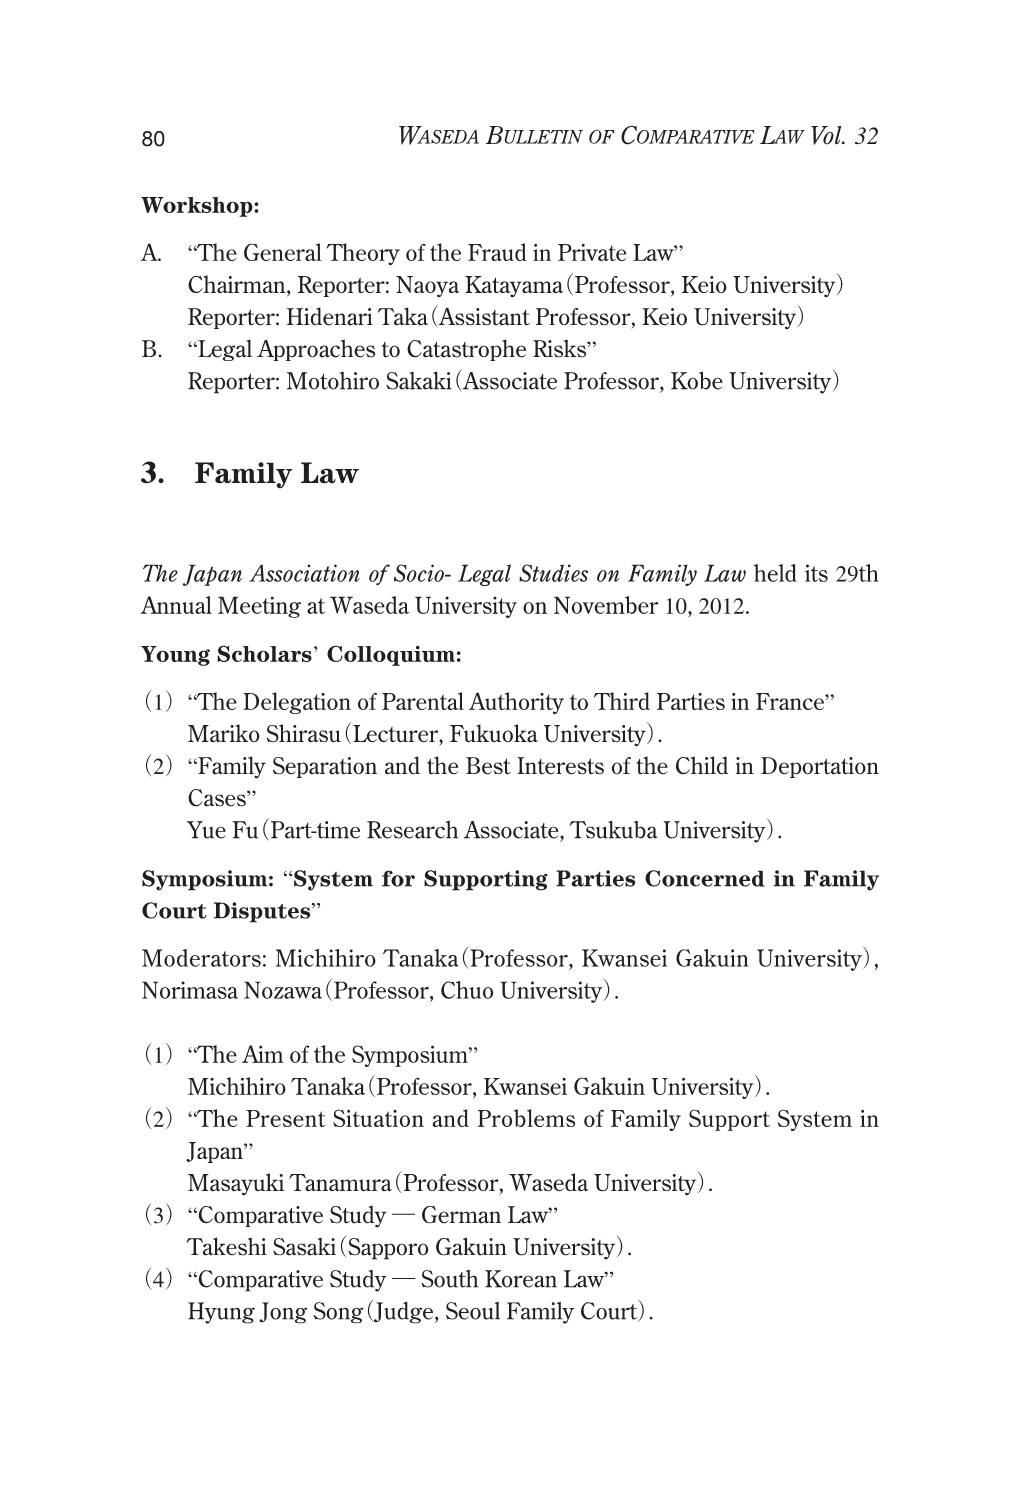 3. Family Law